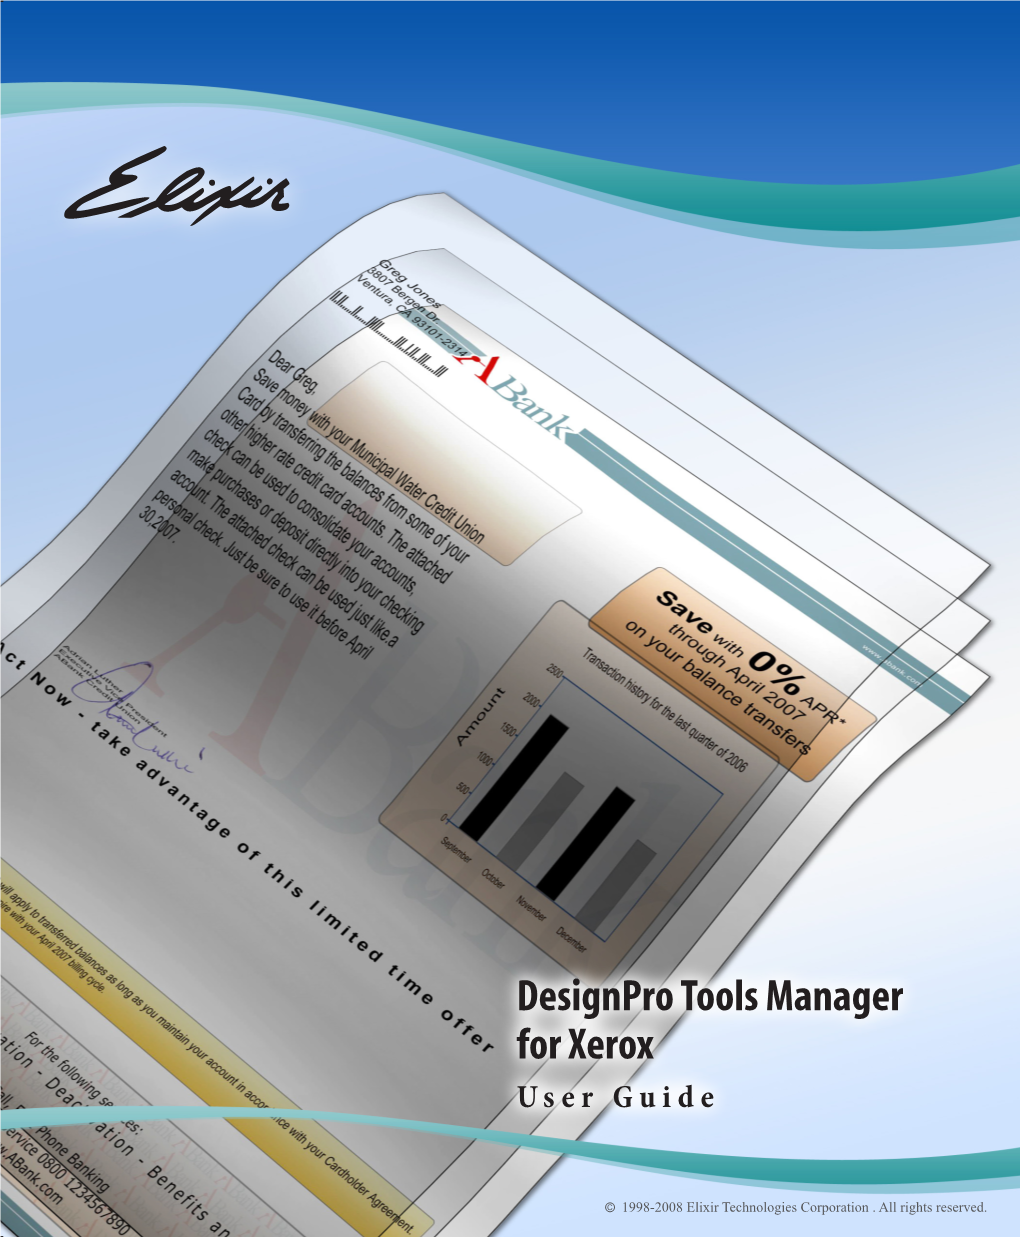 Designpro Manager for Xerox User Guide